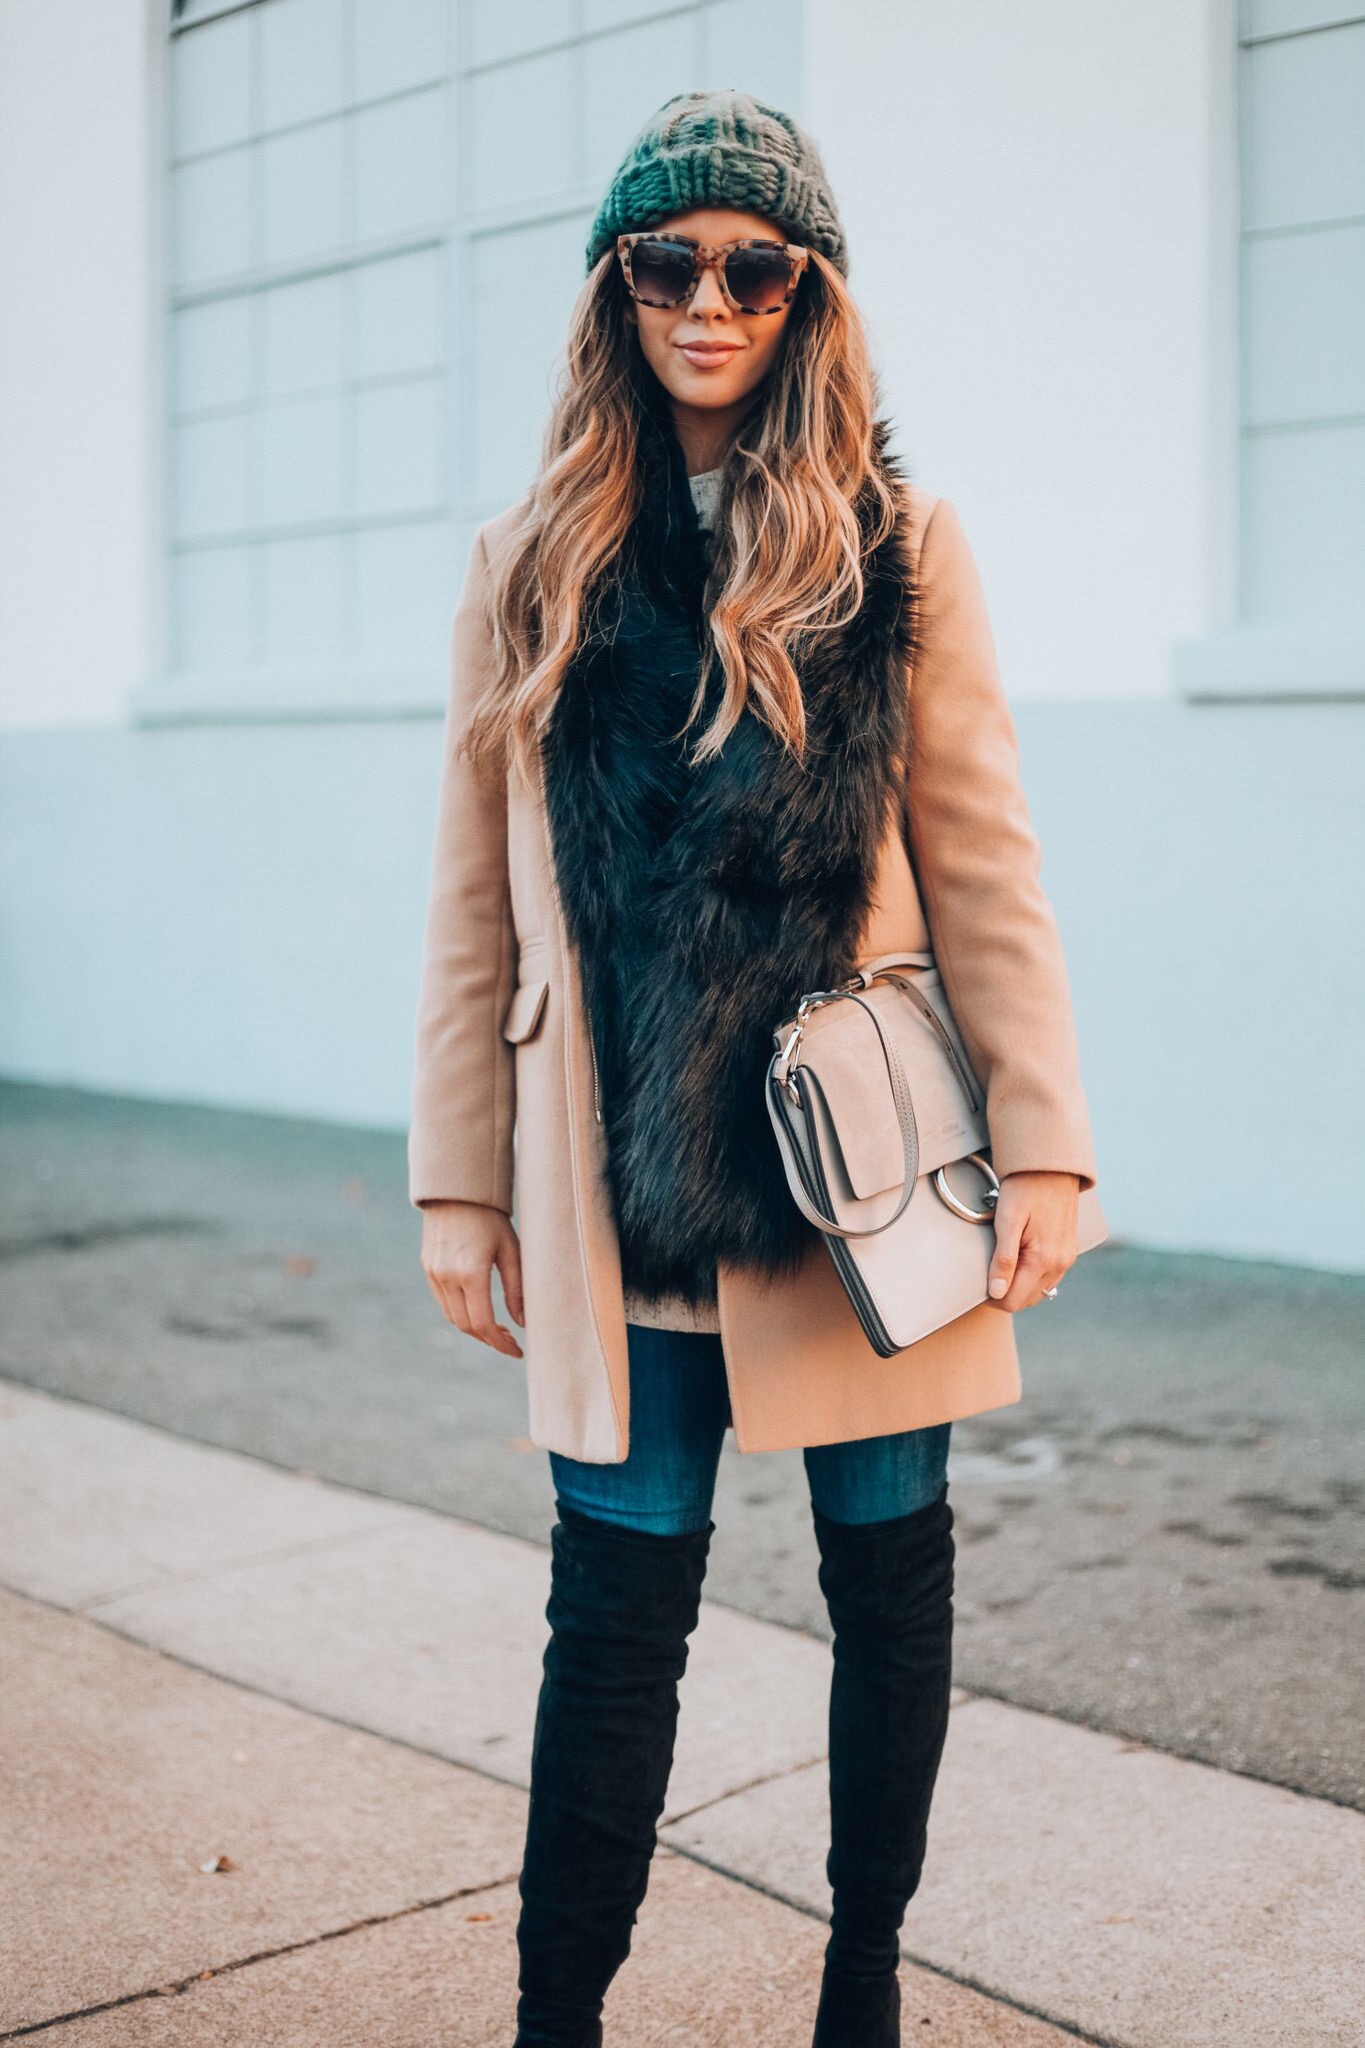 Winter Style: All Bundled Up! | The Girl in the Yellow Dress